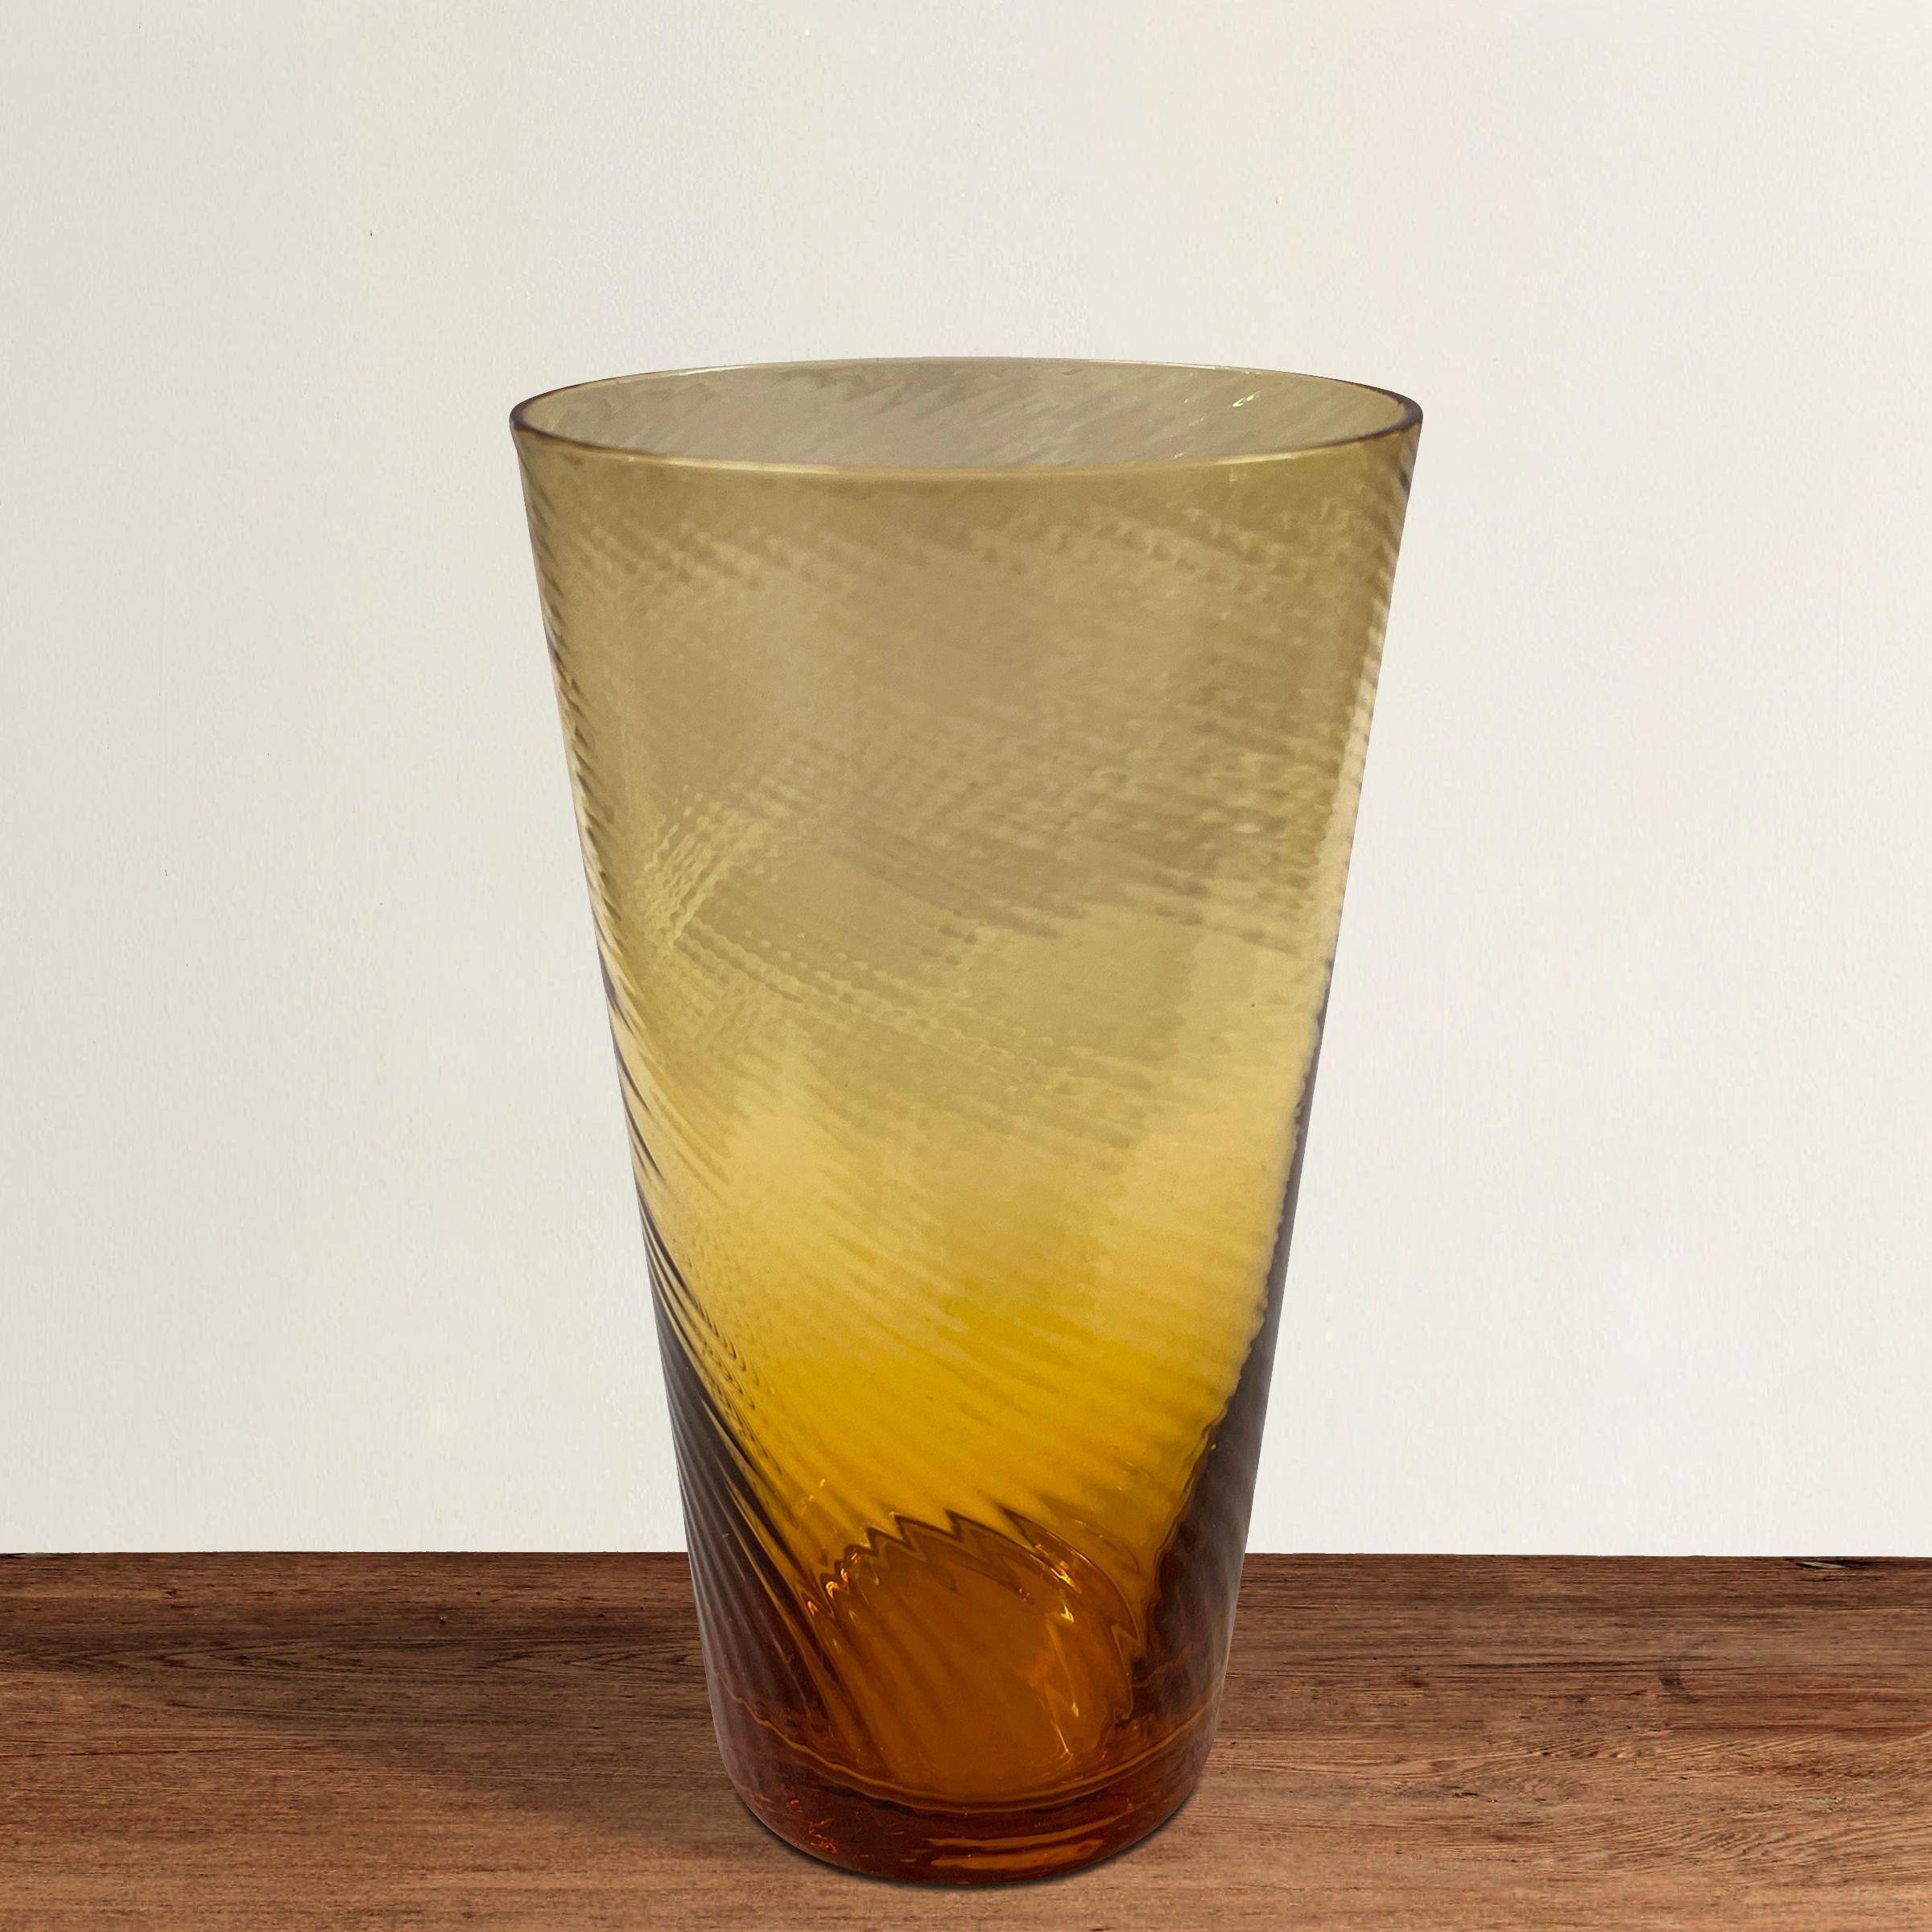 A wonderful set of eight vintage American hand blown amber glass tumblers with a swirled pattern, just waiting for your next garden or beach party!